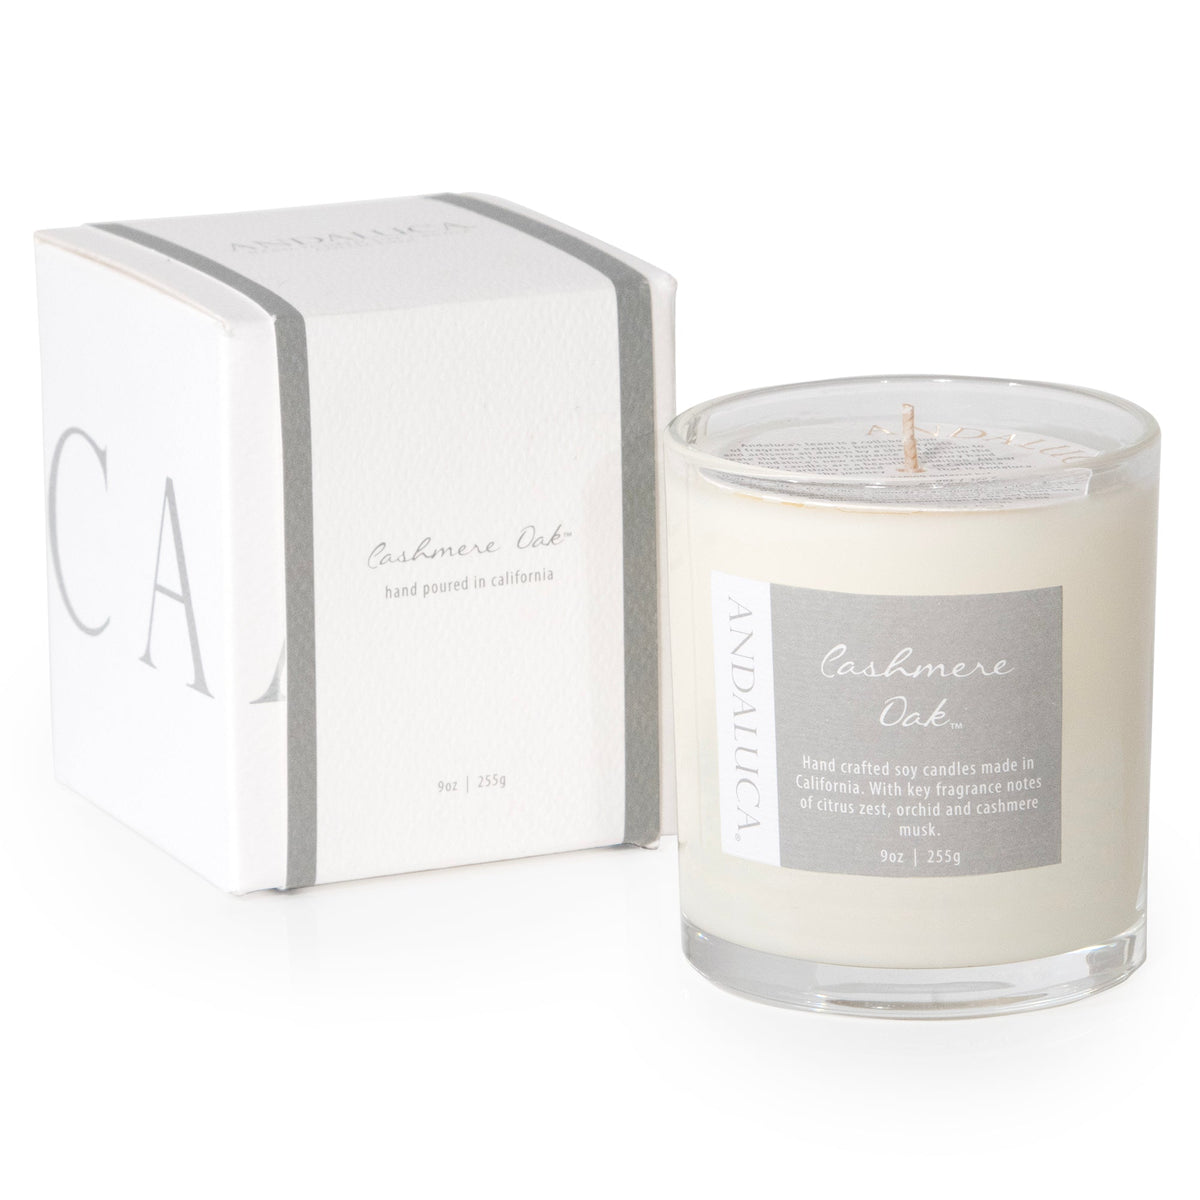 Cashmere Oak 9oz Candle by Andaluca Home